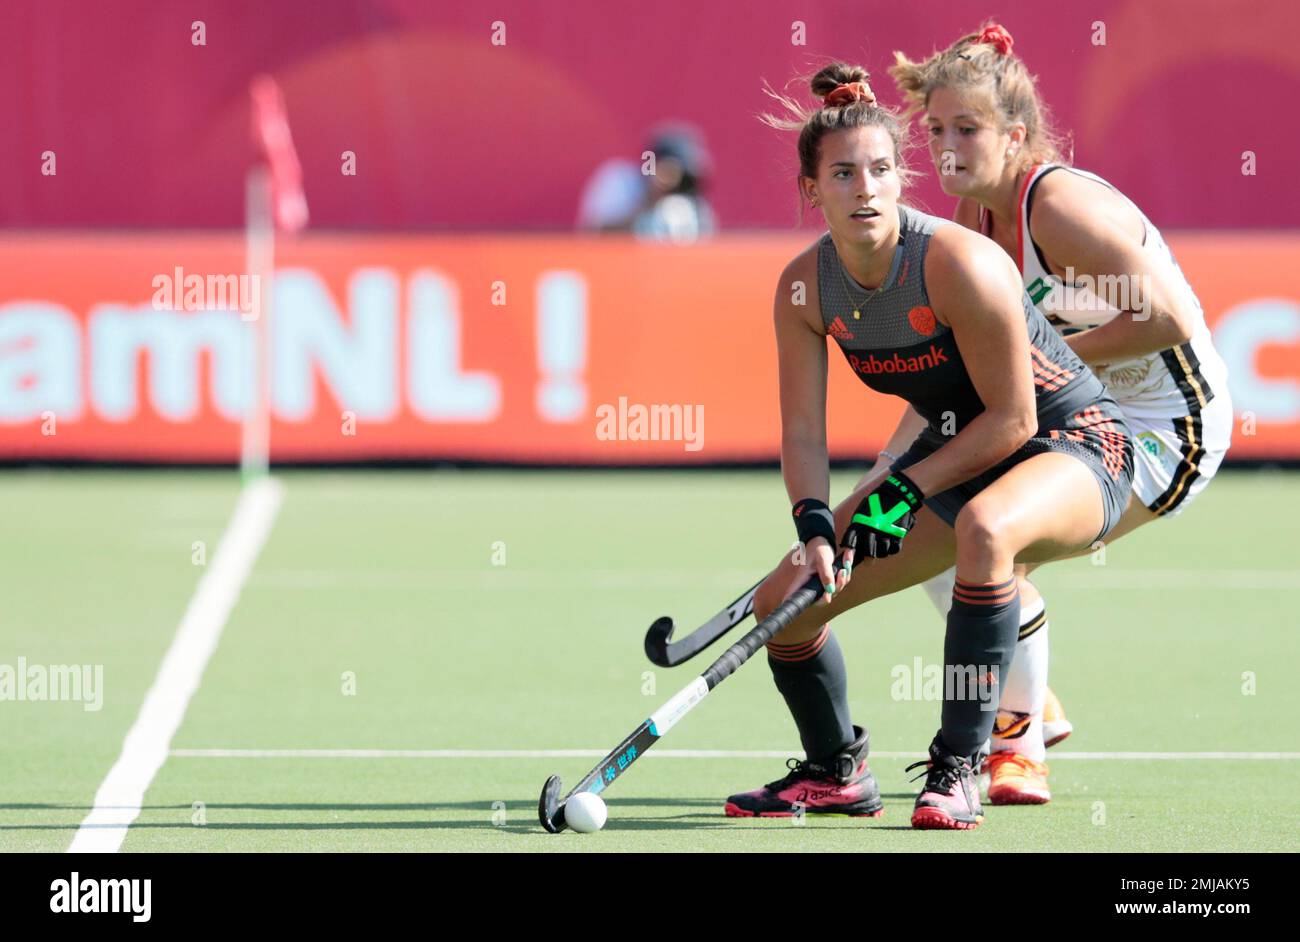 Netherland's Frederique Matla, left, vies for the ball against Germany's  Sonja Zimmermann during a women's European Championship field hockey finals  match between the Netherlands and Germany at the Wilrijkse Plein, Antwerp,  Belgium,